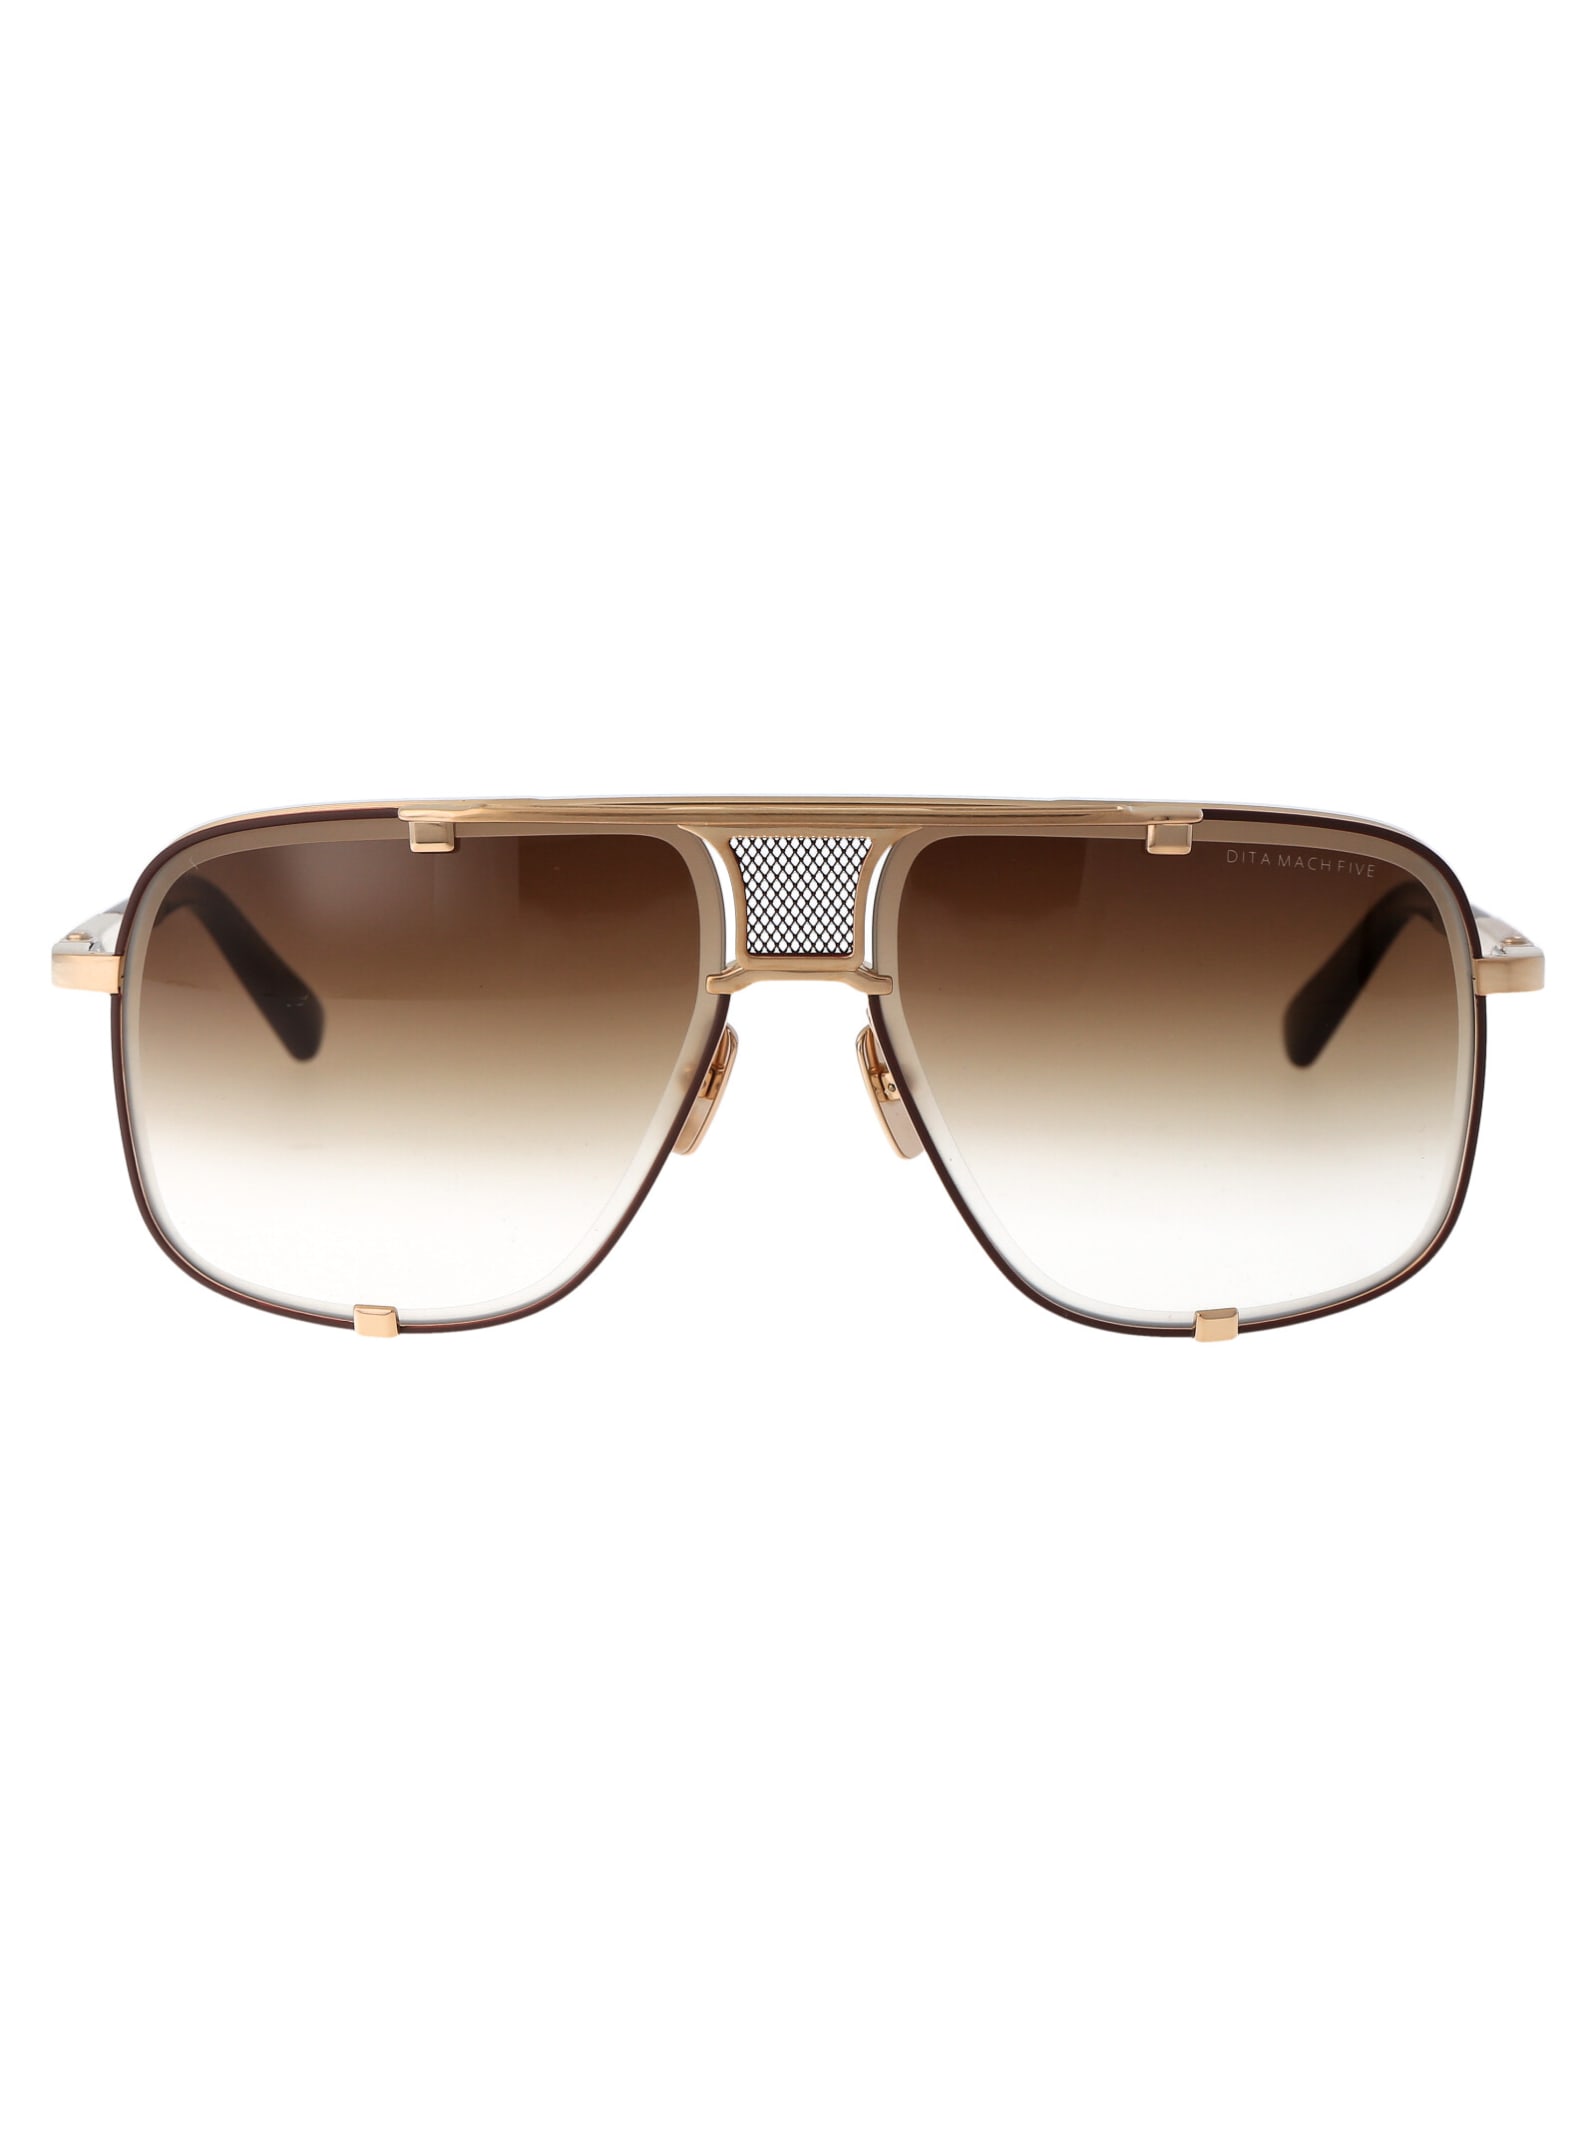 Dita Mach-five Sunglasses In Brushed White Gold - Brown W/ Brown Gradient